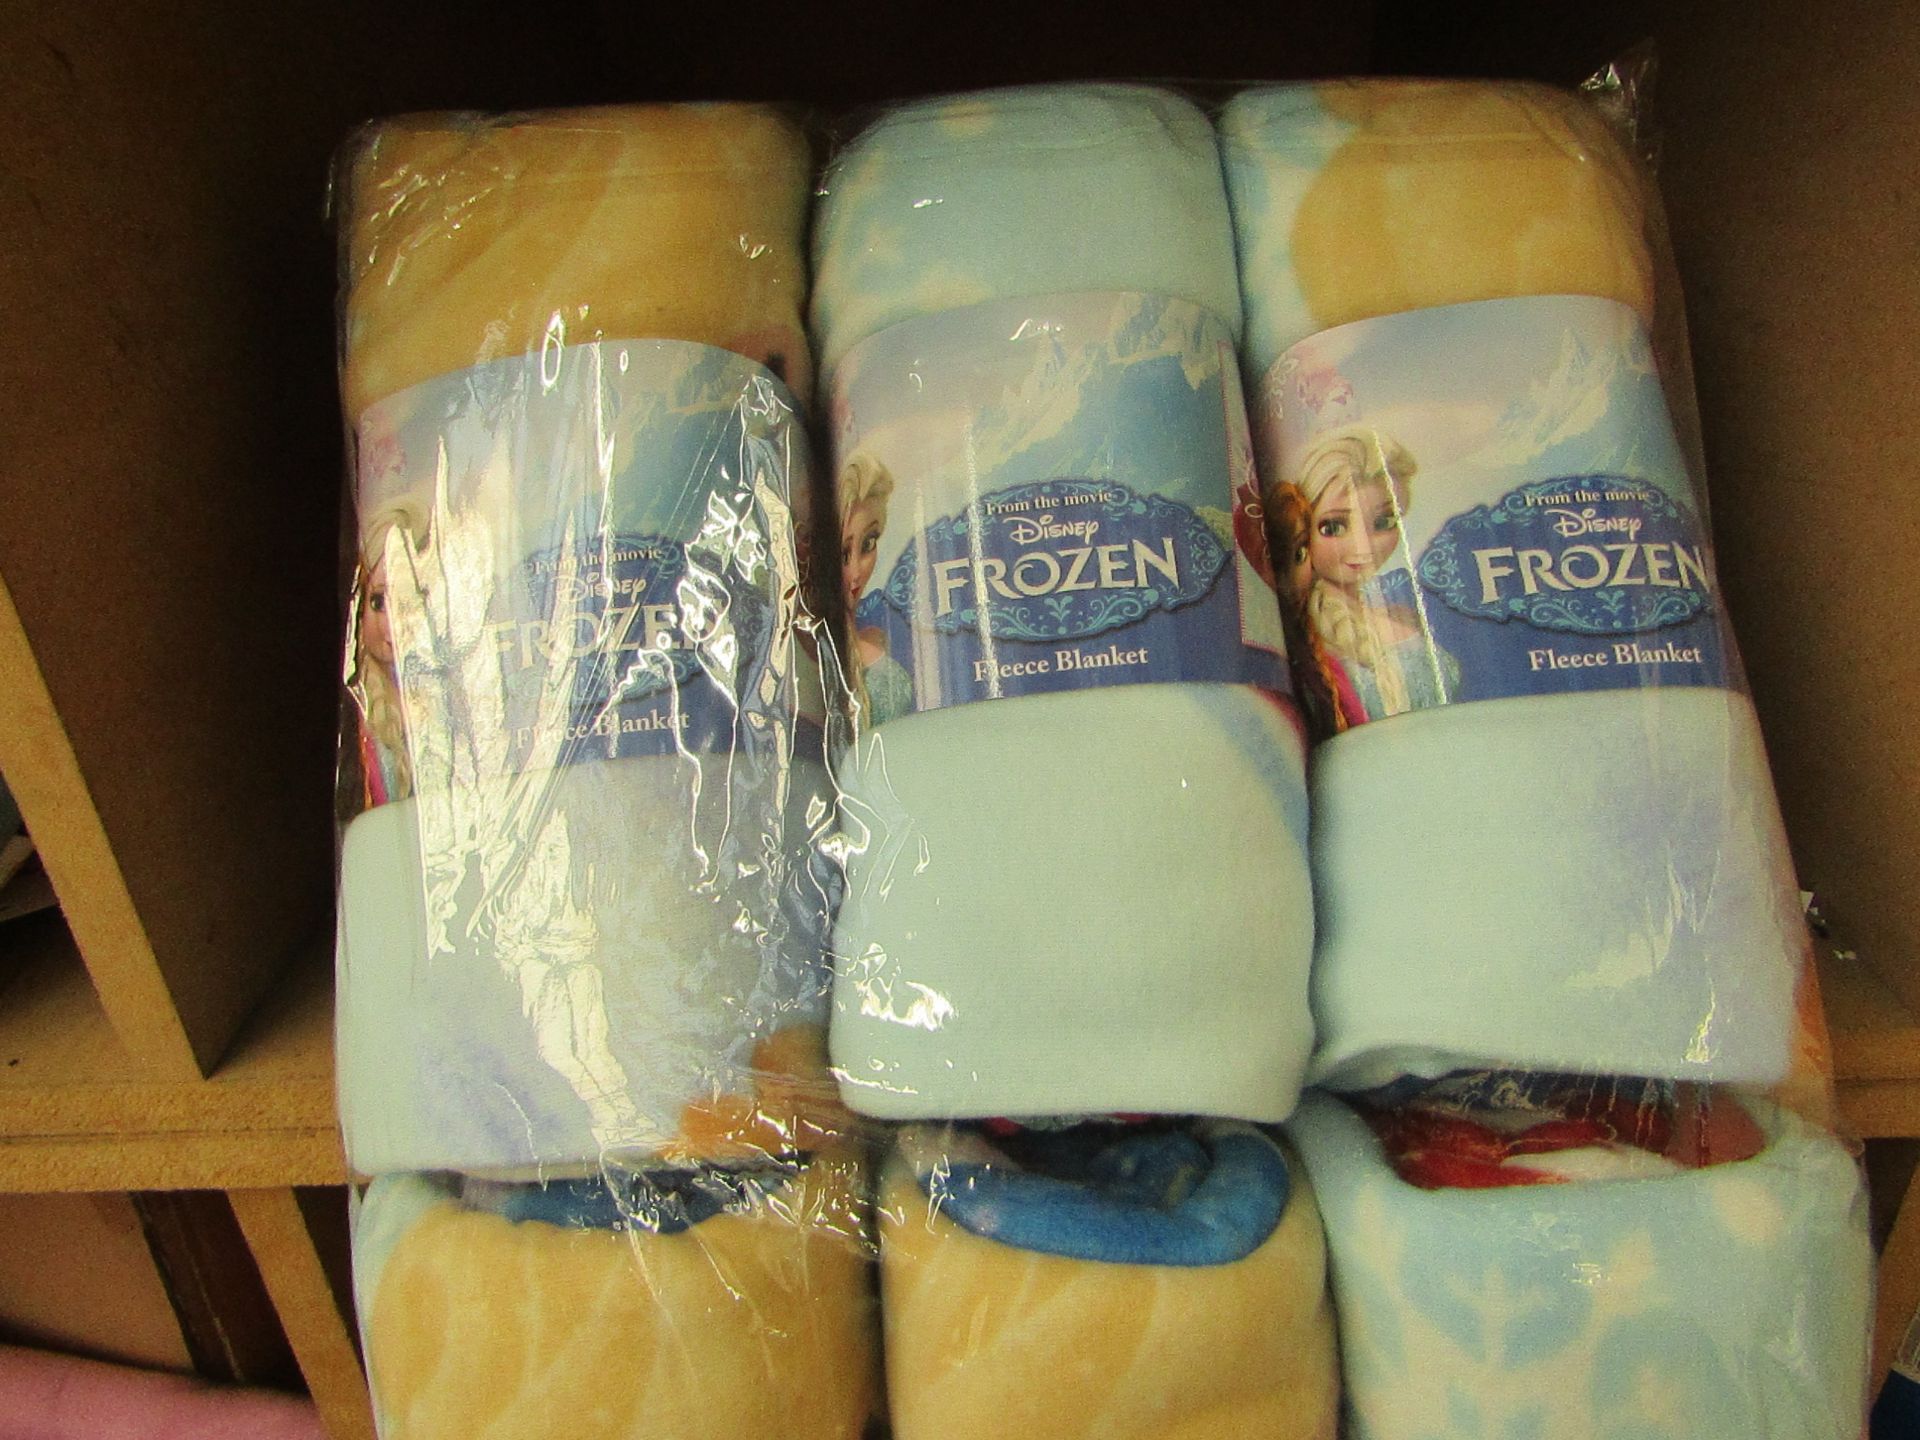 Disney Frozen Fleece Blanket. 100cm x 150cm. New with tags. Ideal Stocking Fillers